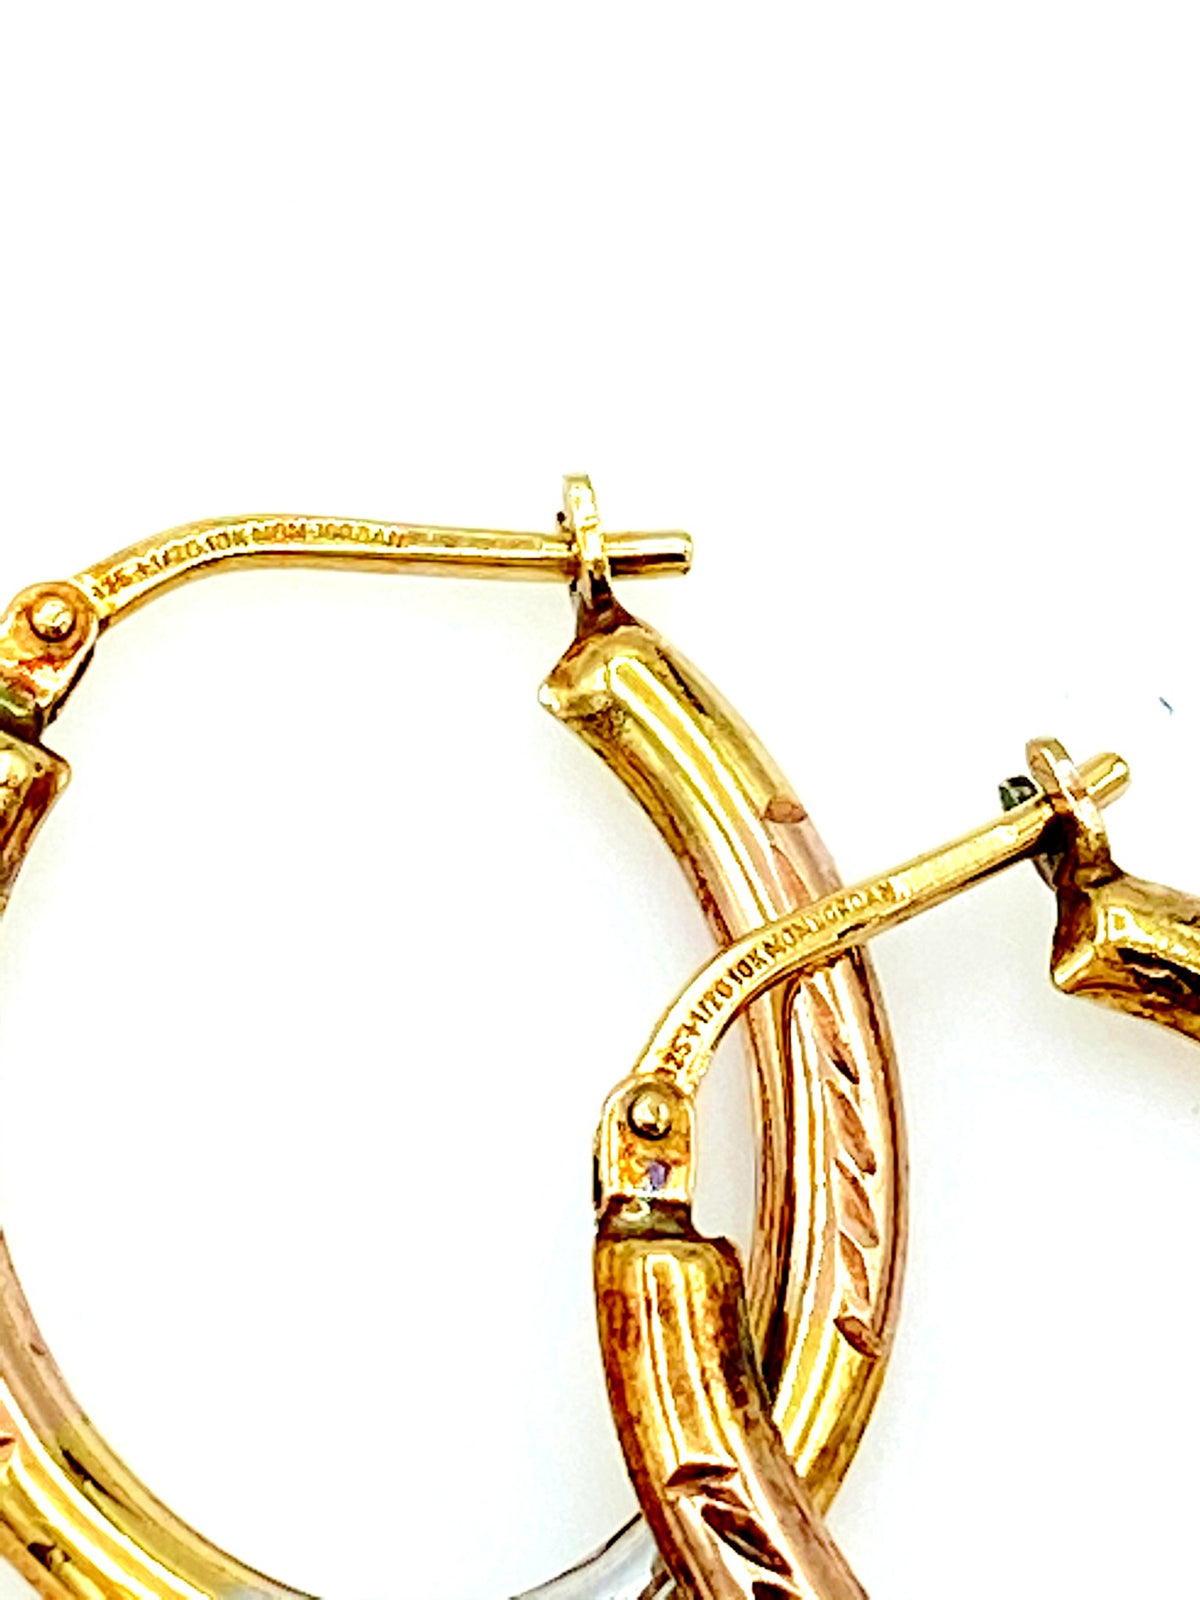 Tri-Color Gold Filled Vintage Hoop Pierced Earrings - 24 Wishes Vintage Jewelry